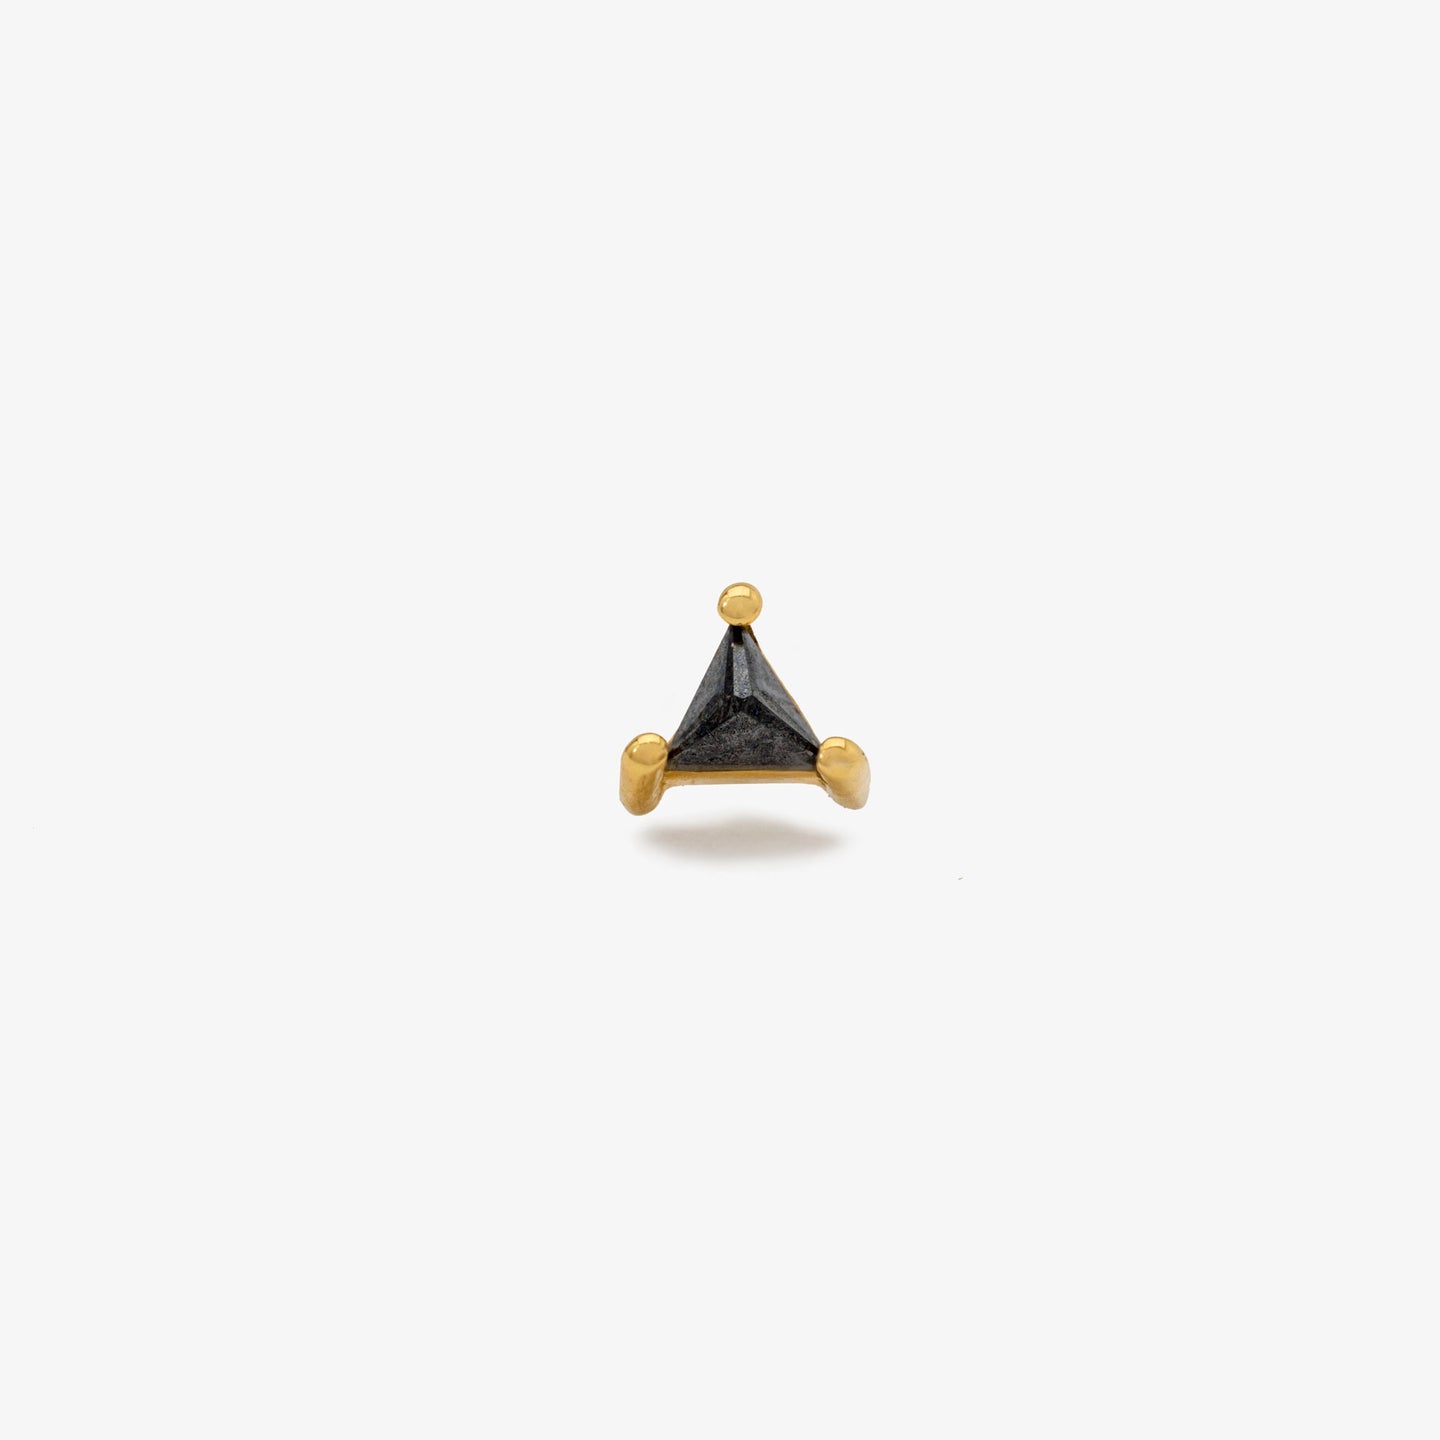 This is a small 18k gold stud with a triangle-cut black diamond color:18k gold/black diamond